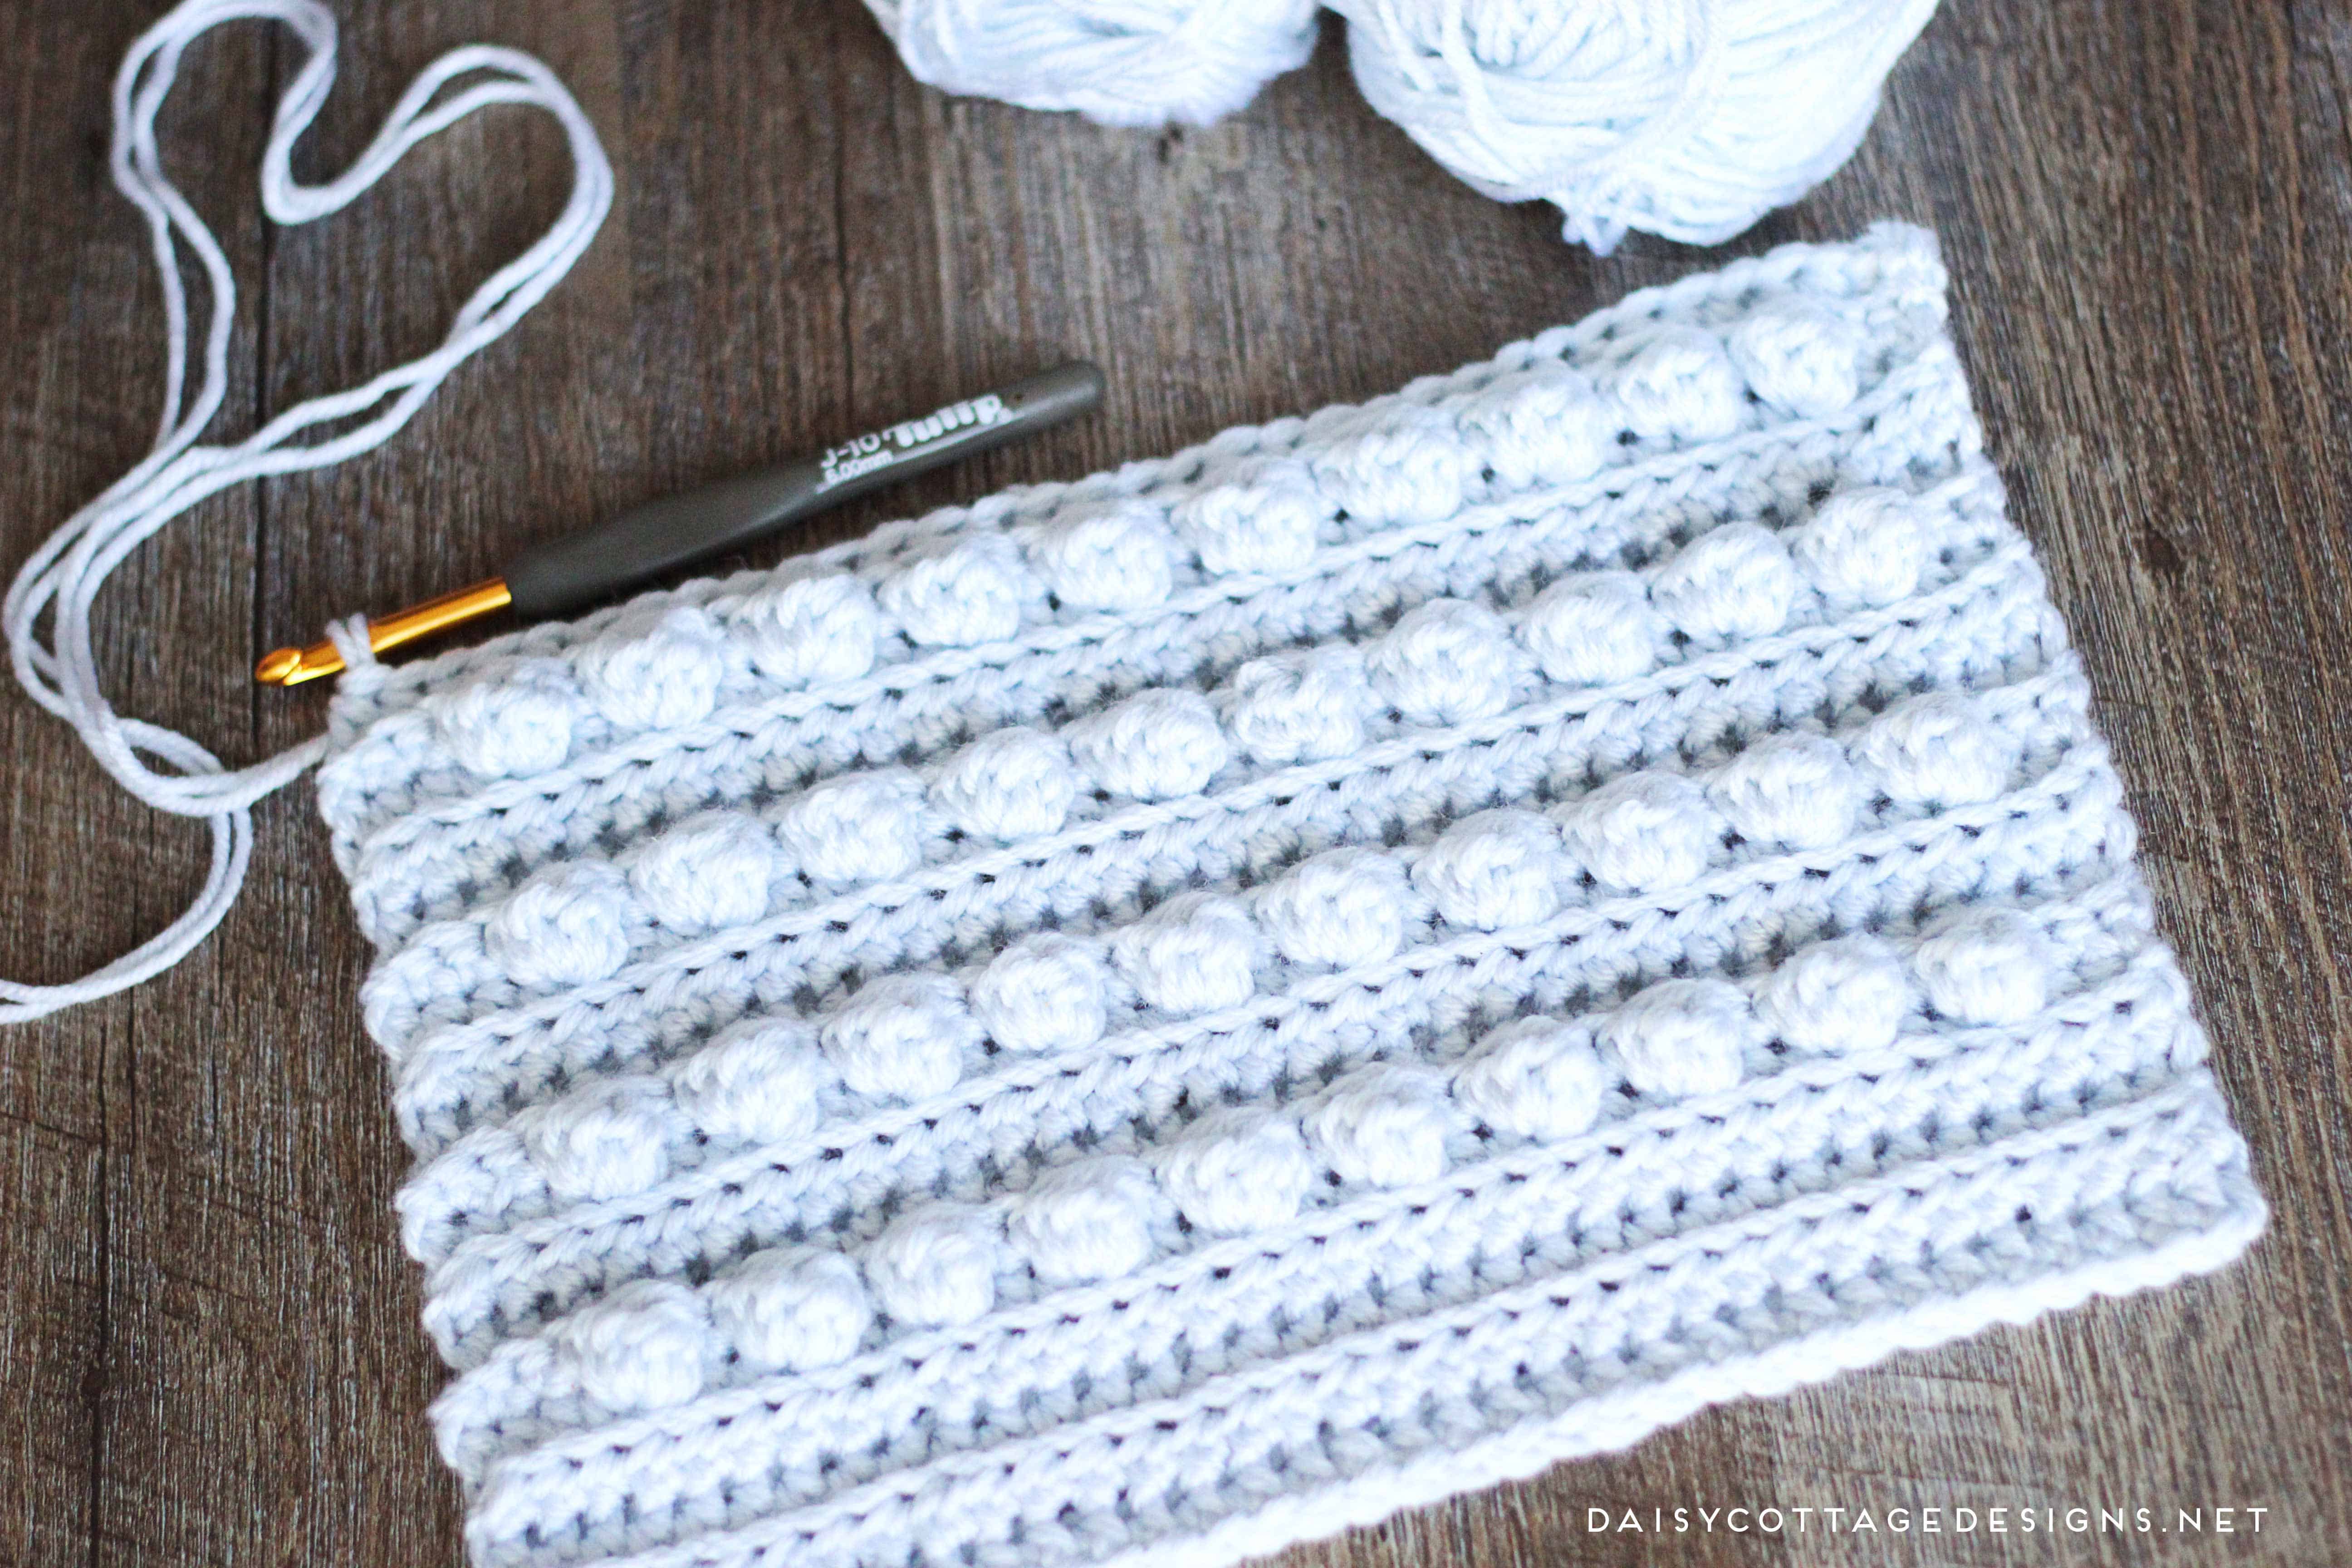 Learn how to crochet a textured piece using this bobble crochet pattern from Daisy Cottage Designs | free crochet pattern, bobble crochet pattern, easy bobble crochet pattern, ribbed crochet pattern